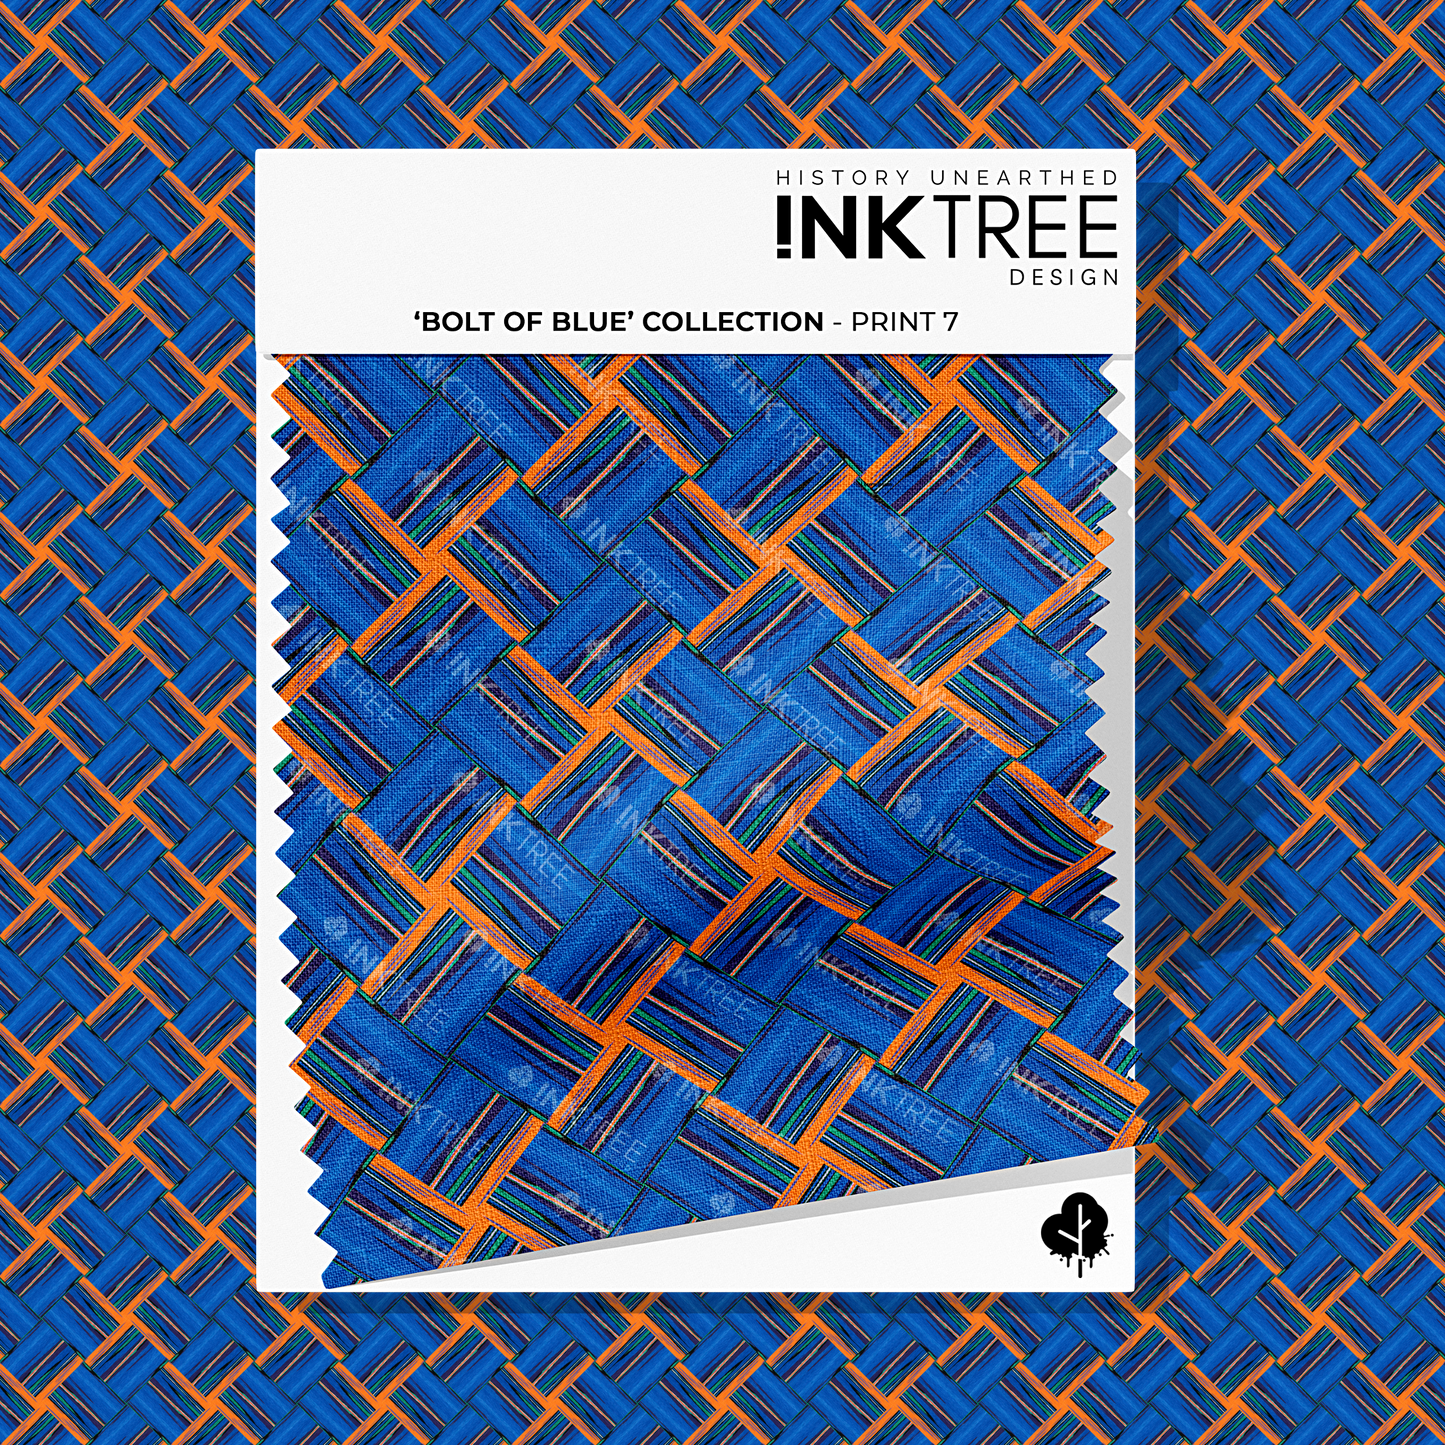 A white card fabric swatch with an orange, white, black, blue and green square print with an ink tree design logo on it.  There is the same pattern on the background.